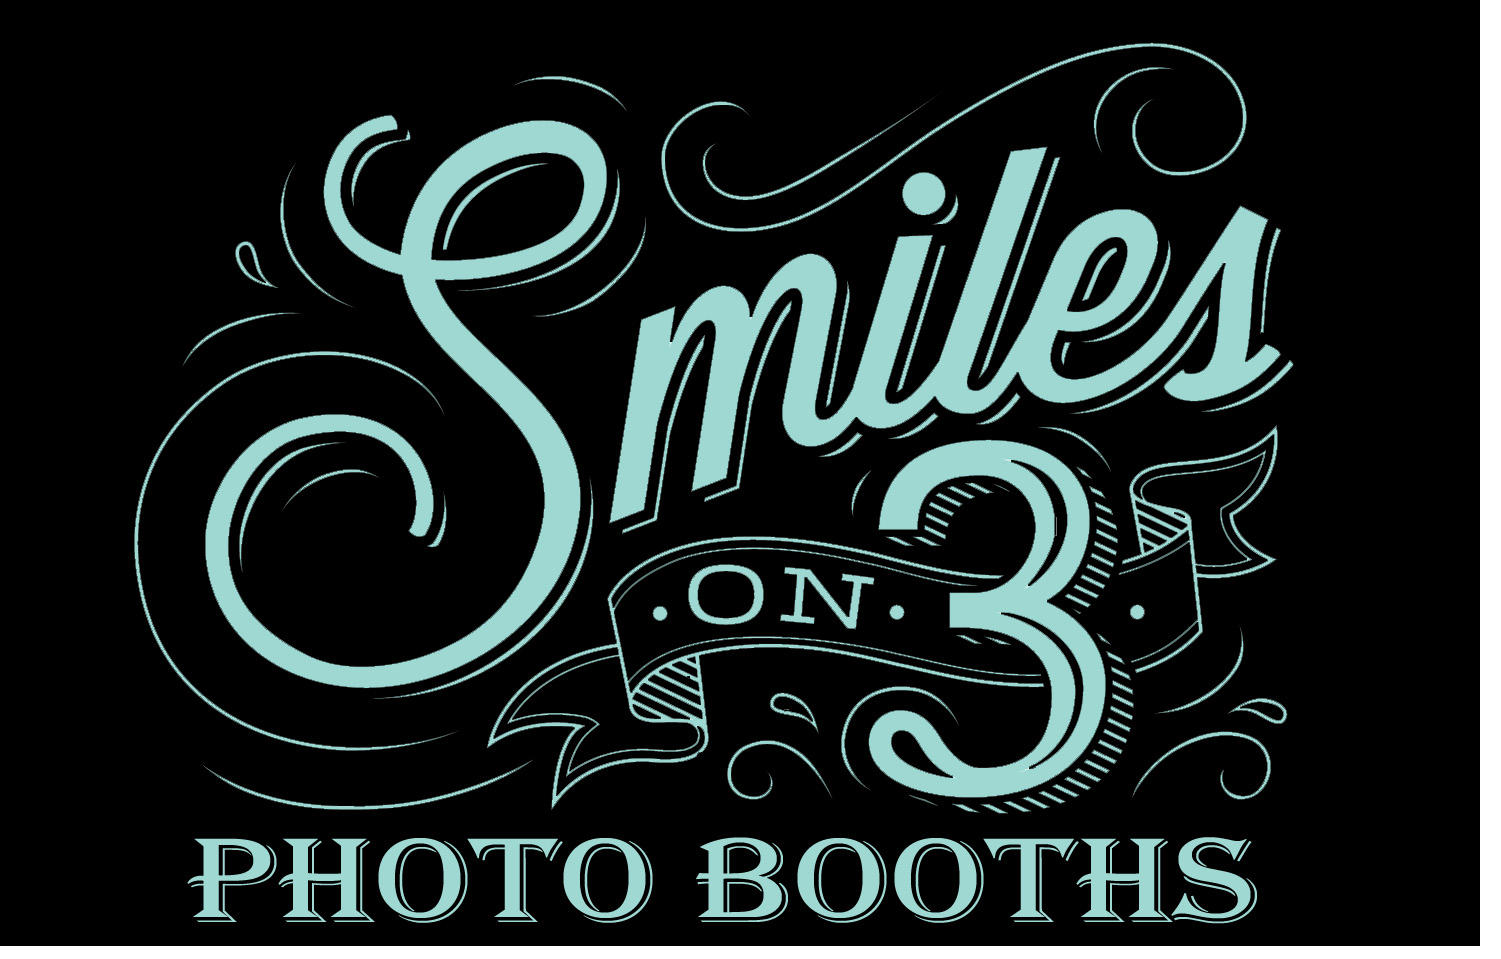 Photo booth fun from Smiles on 3 in Salt Lake City! Contact us today for a rental at 801-598-8827!